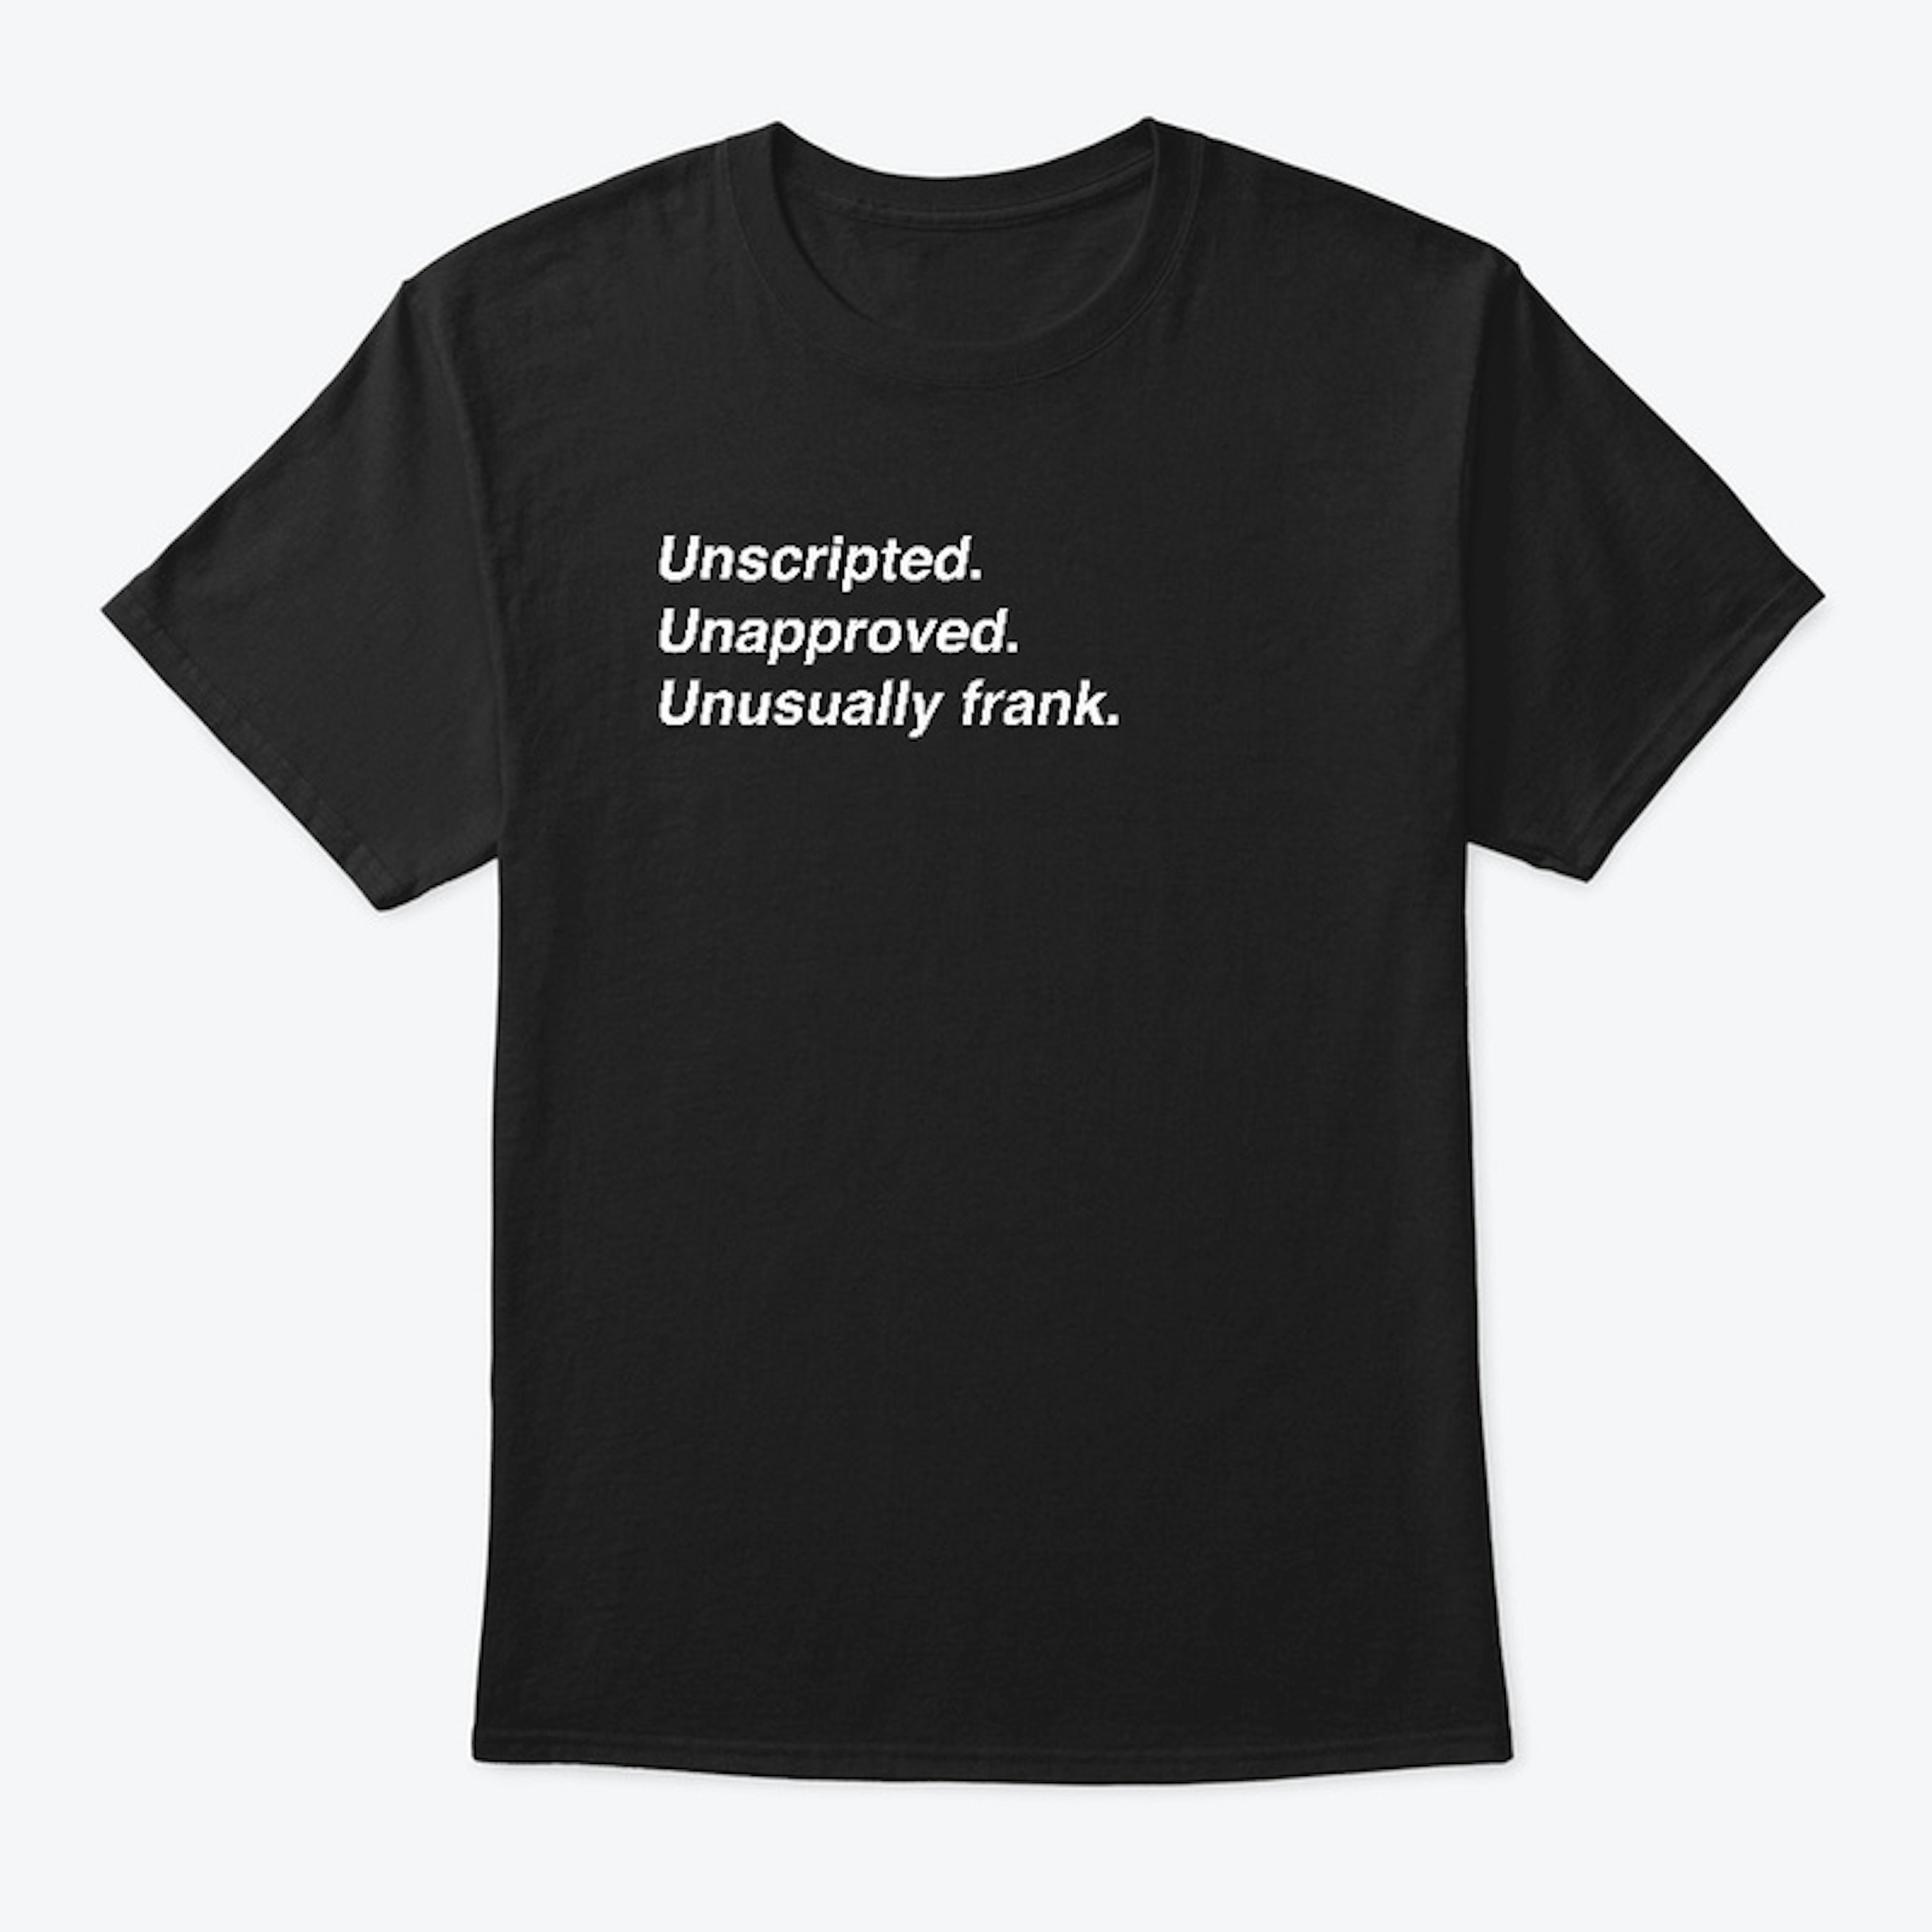 Unscripted. Unapproved. - AAH Tee